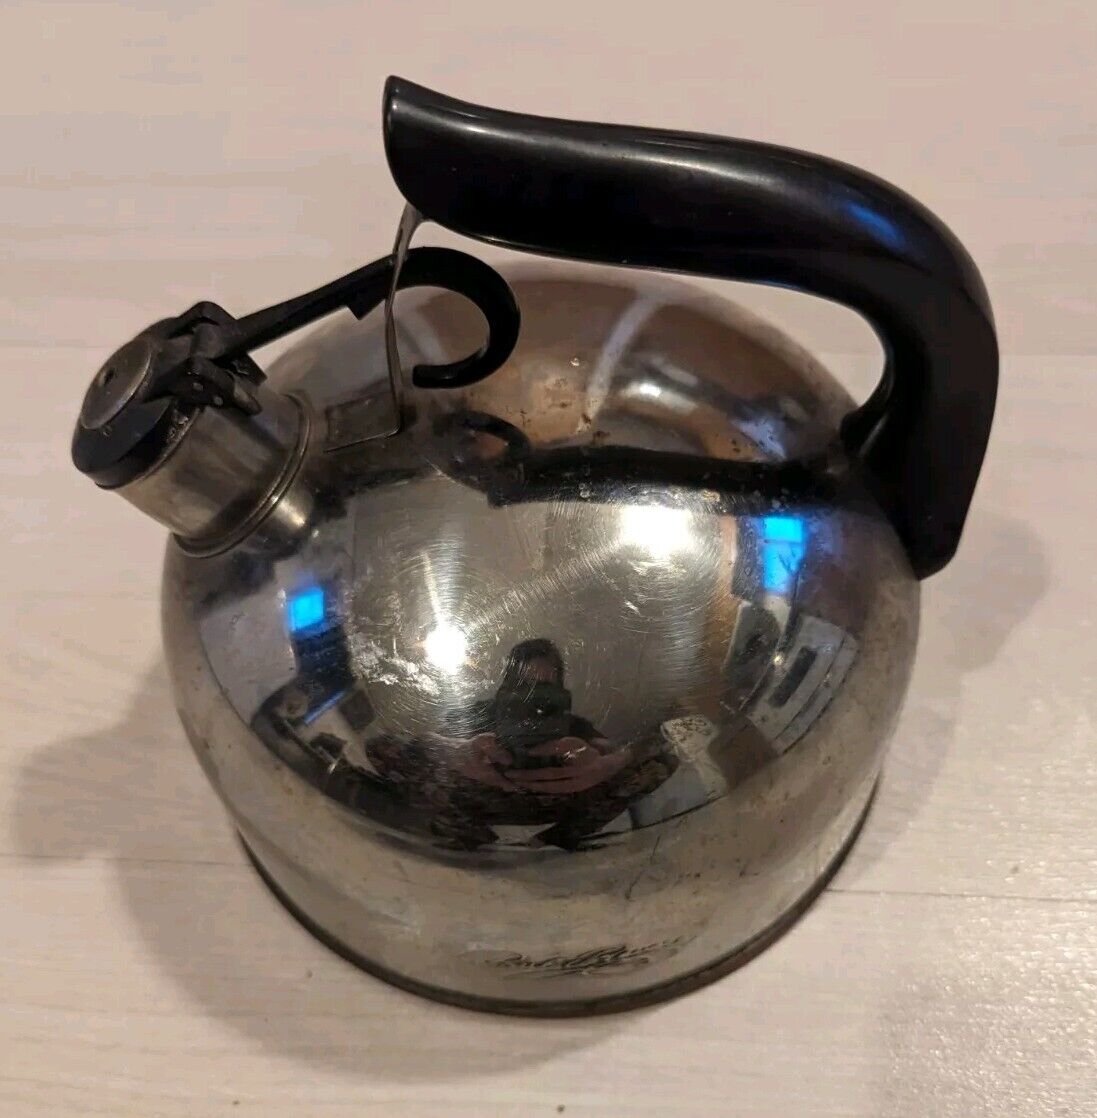 Vintage Revere Ware Whistling Tea Kettle Pot Copper Bottom A 94-C Made in China